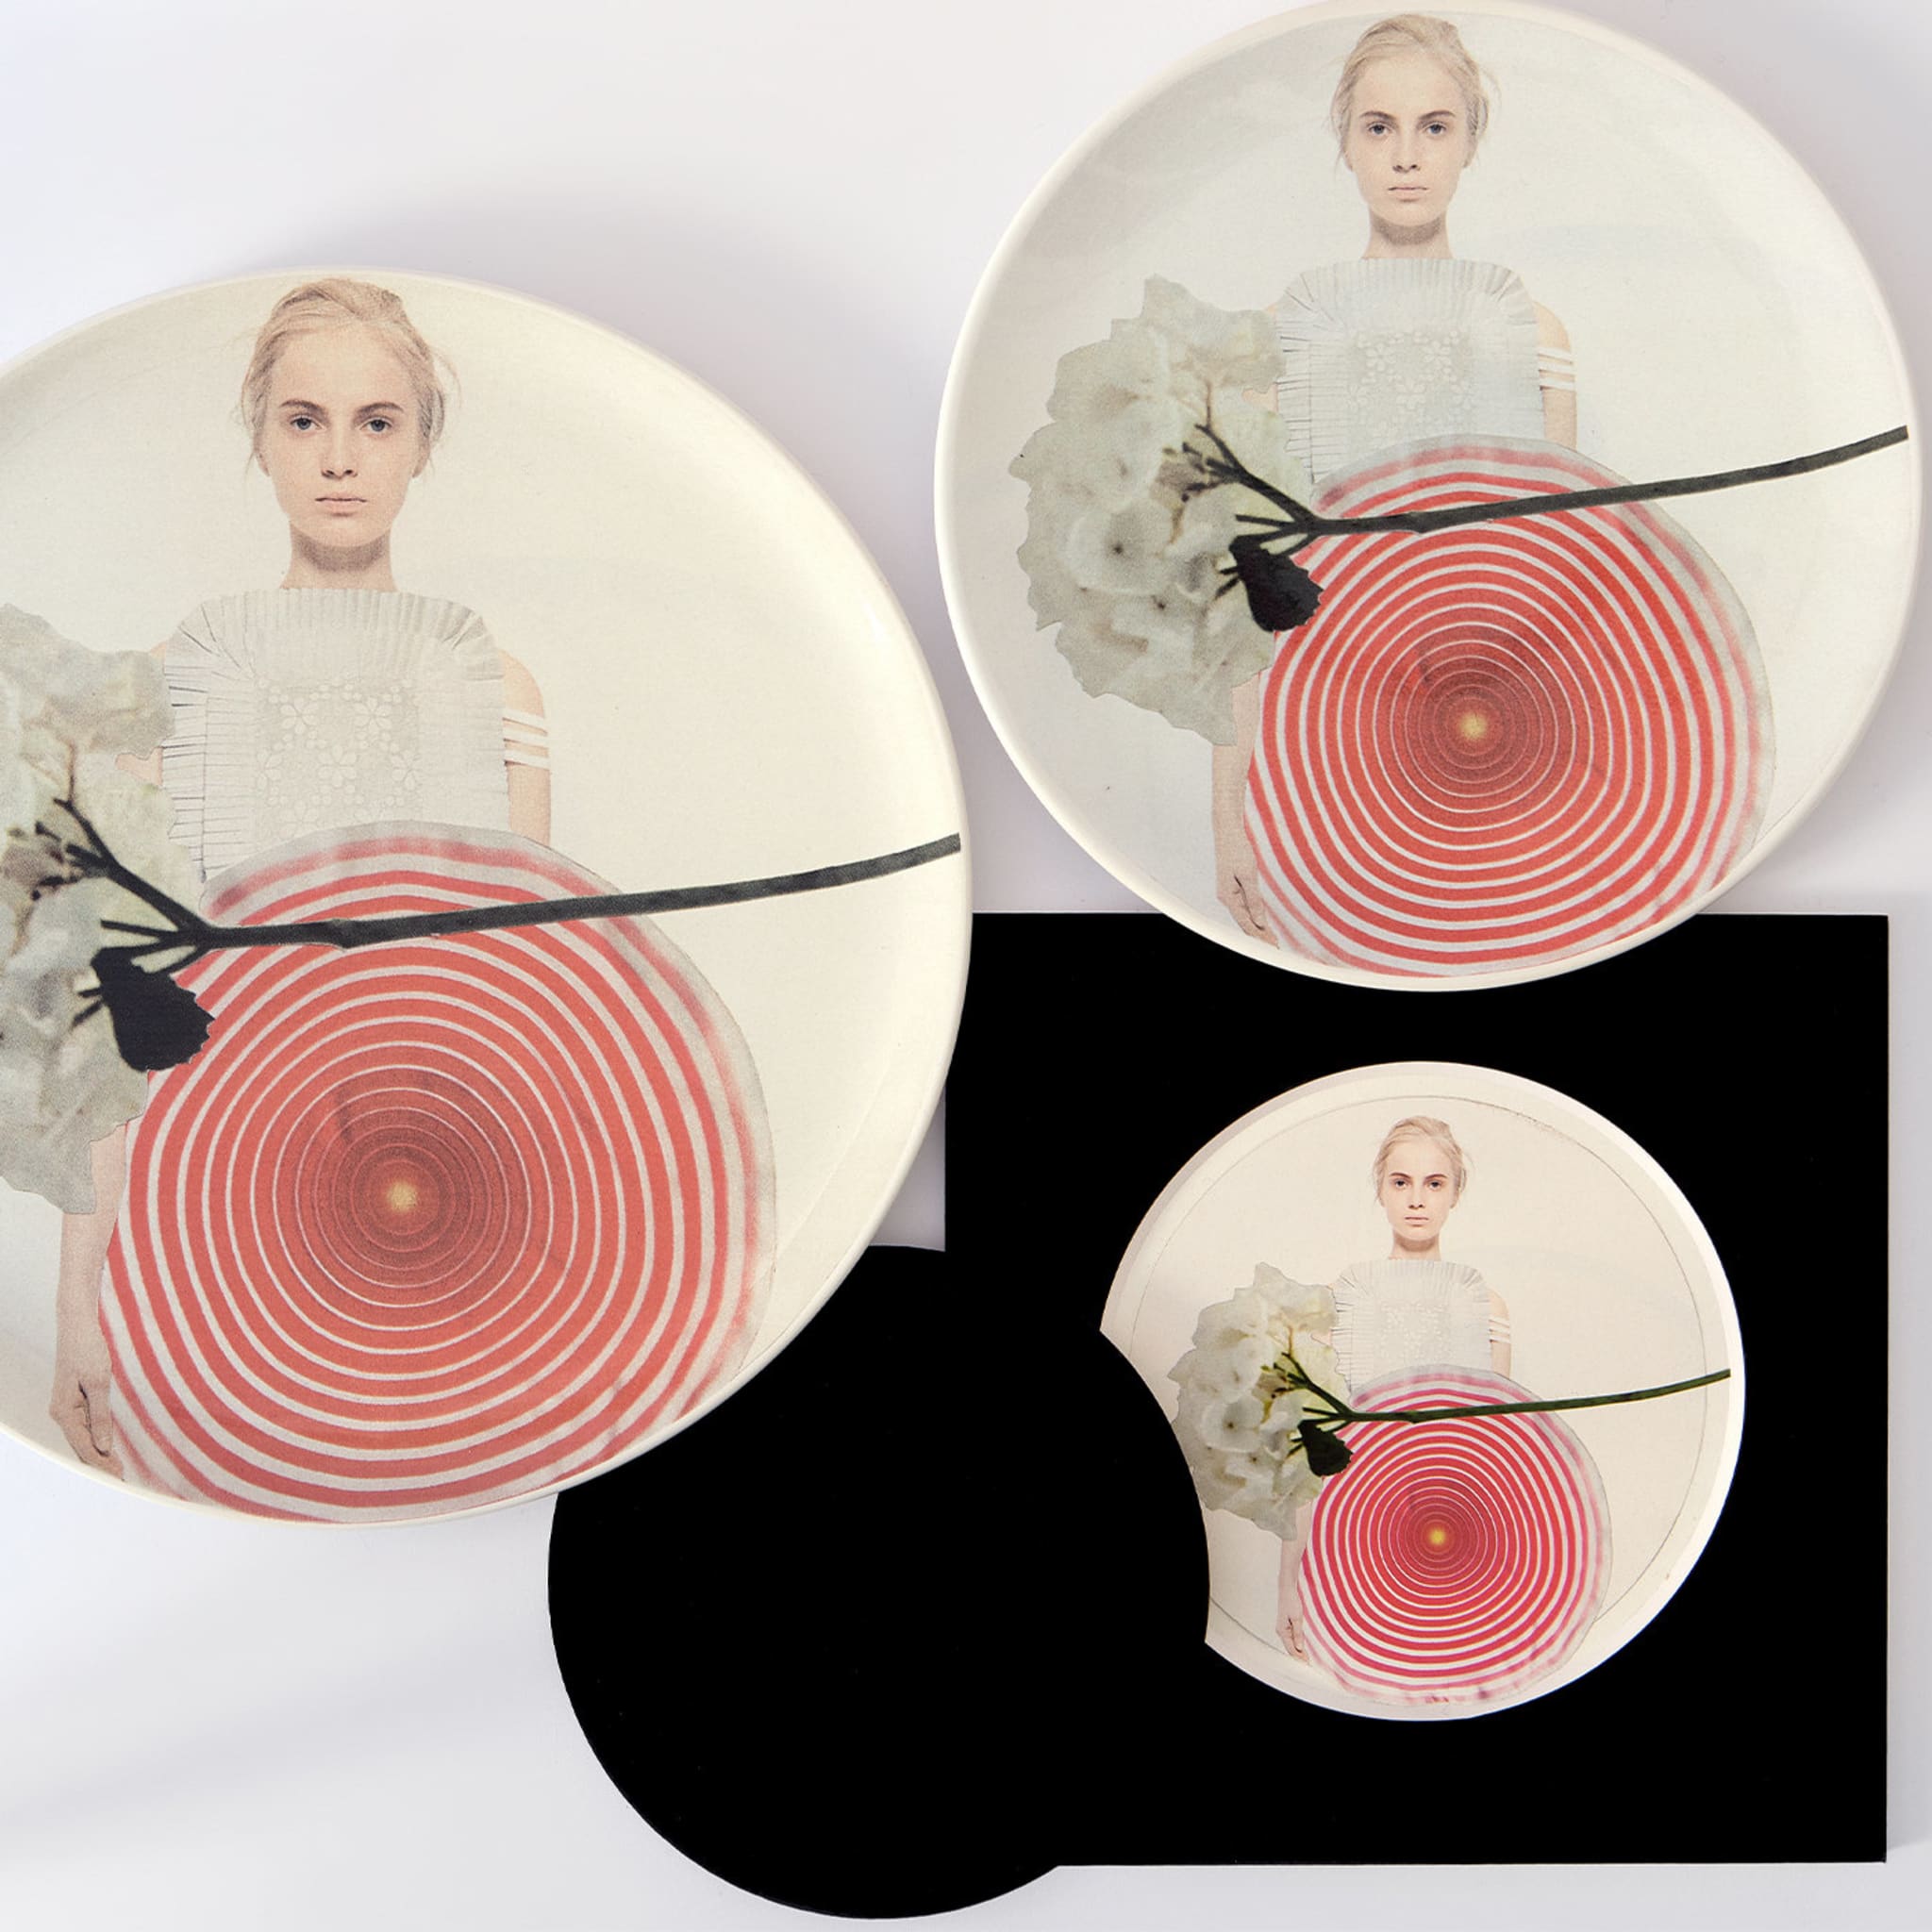 Oh Women! Decorative Plate #1 Limited Edition - Alternative view 3